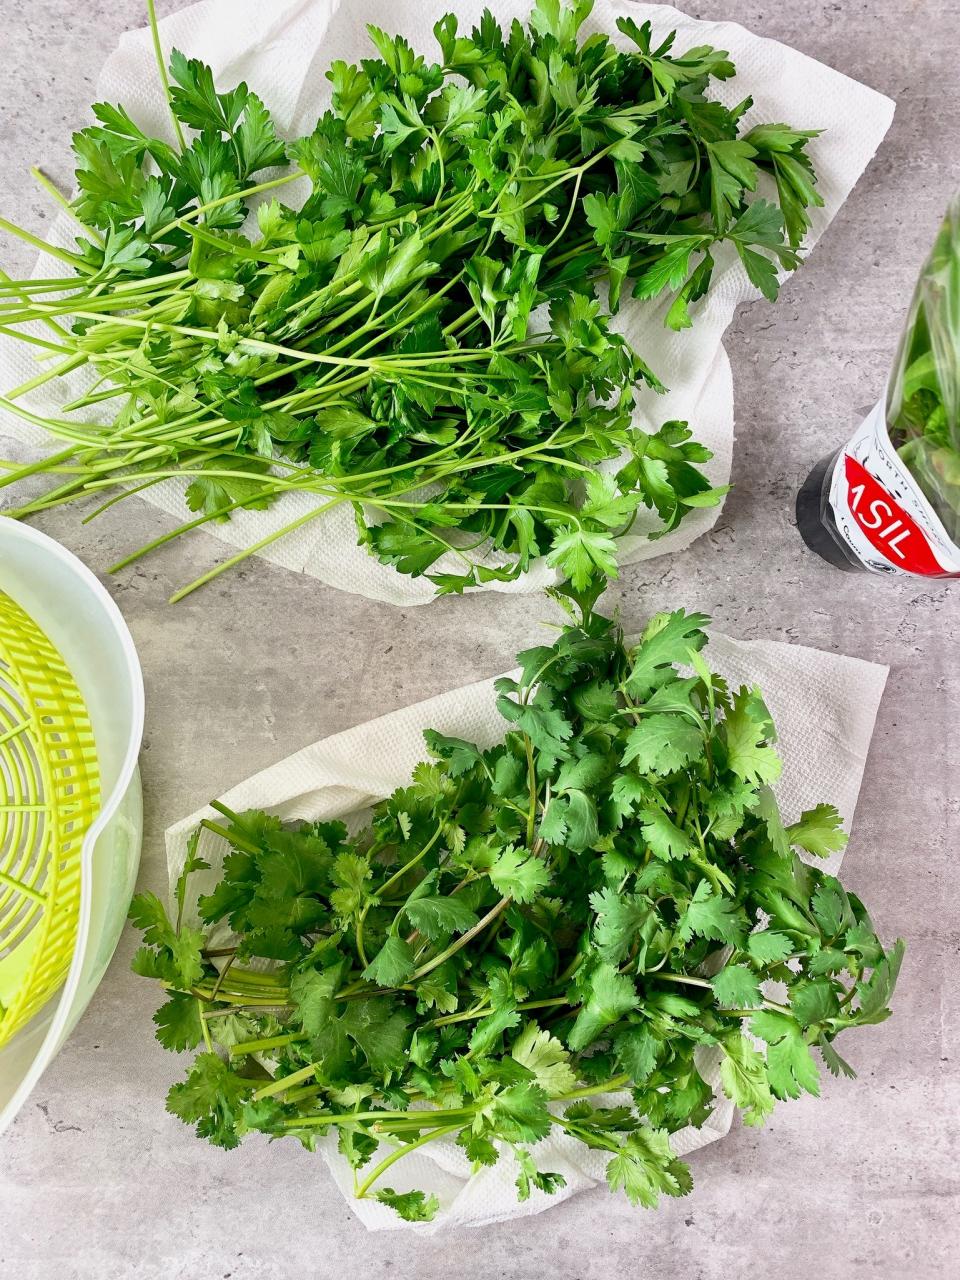 Washing herbs ahead of time not only makes mealtime easier, it keeps them fresh longer.